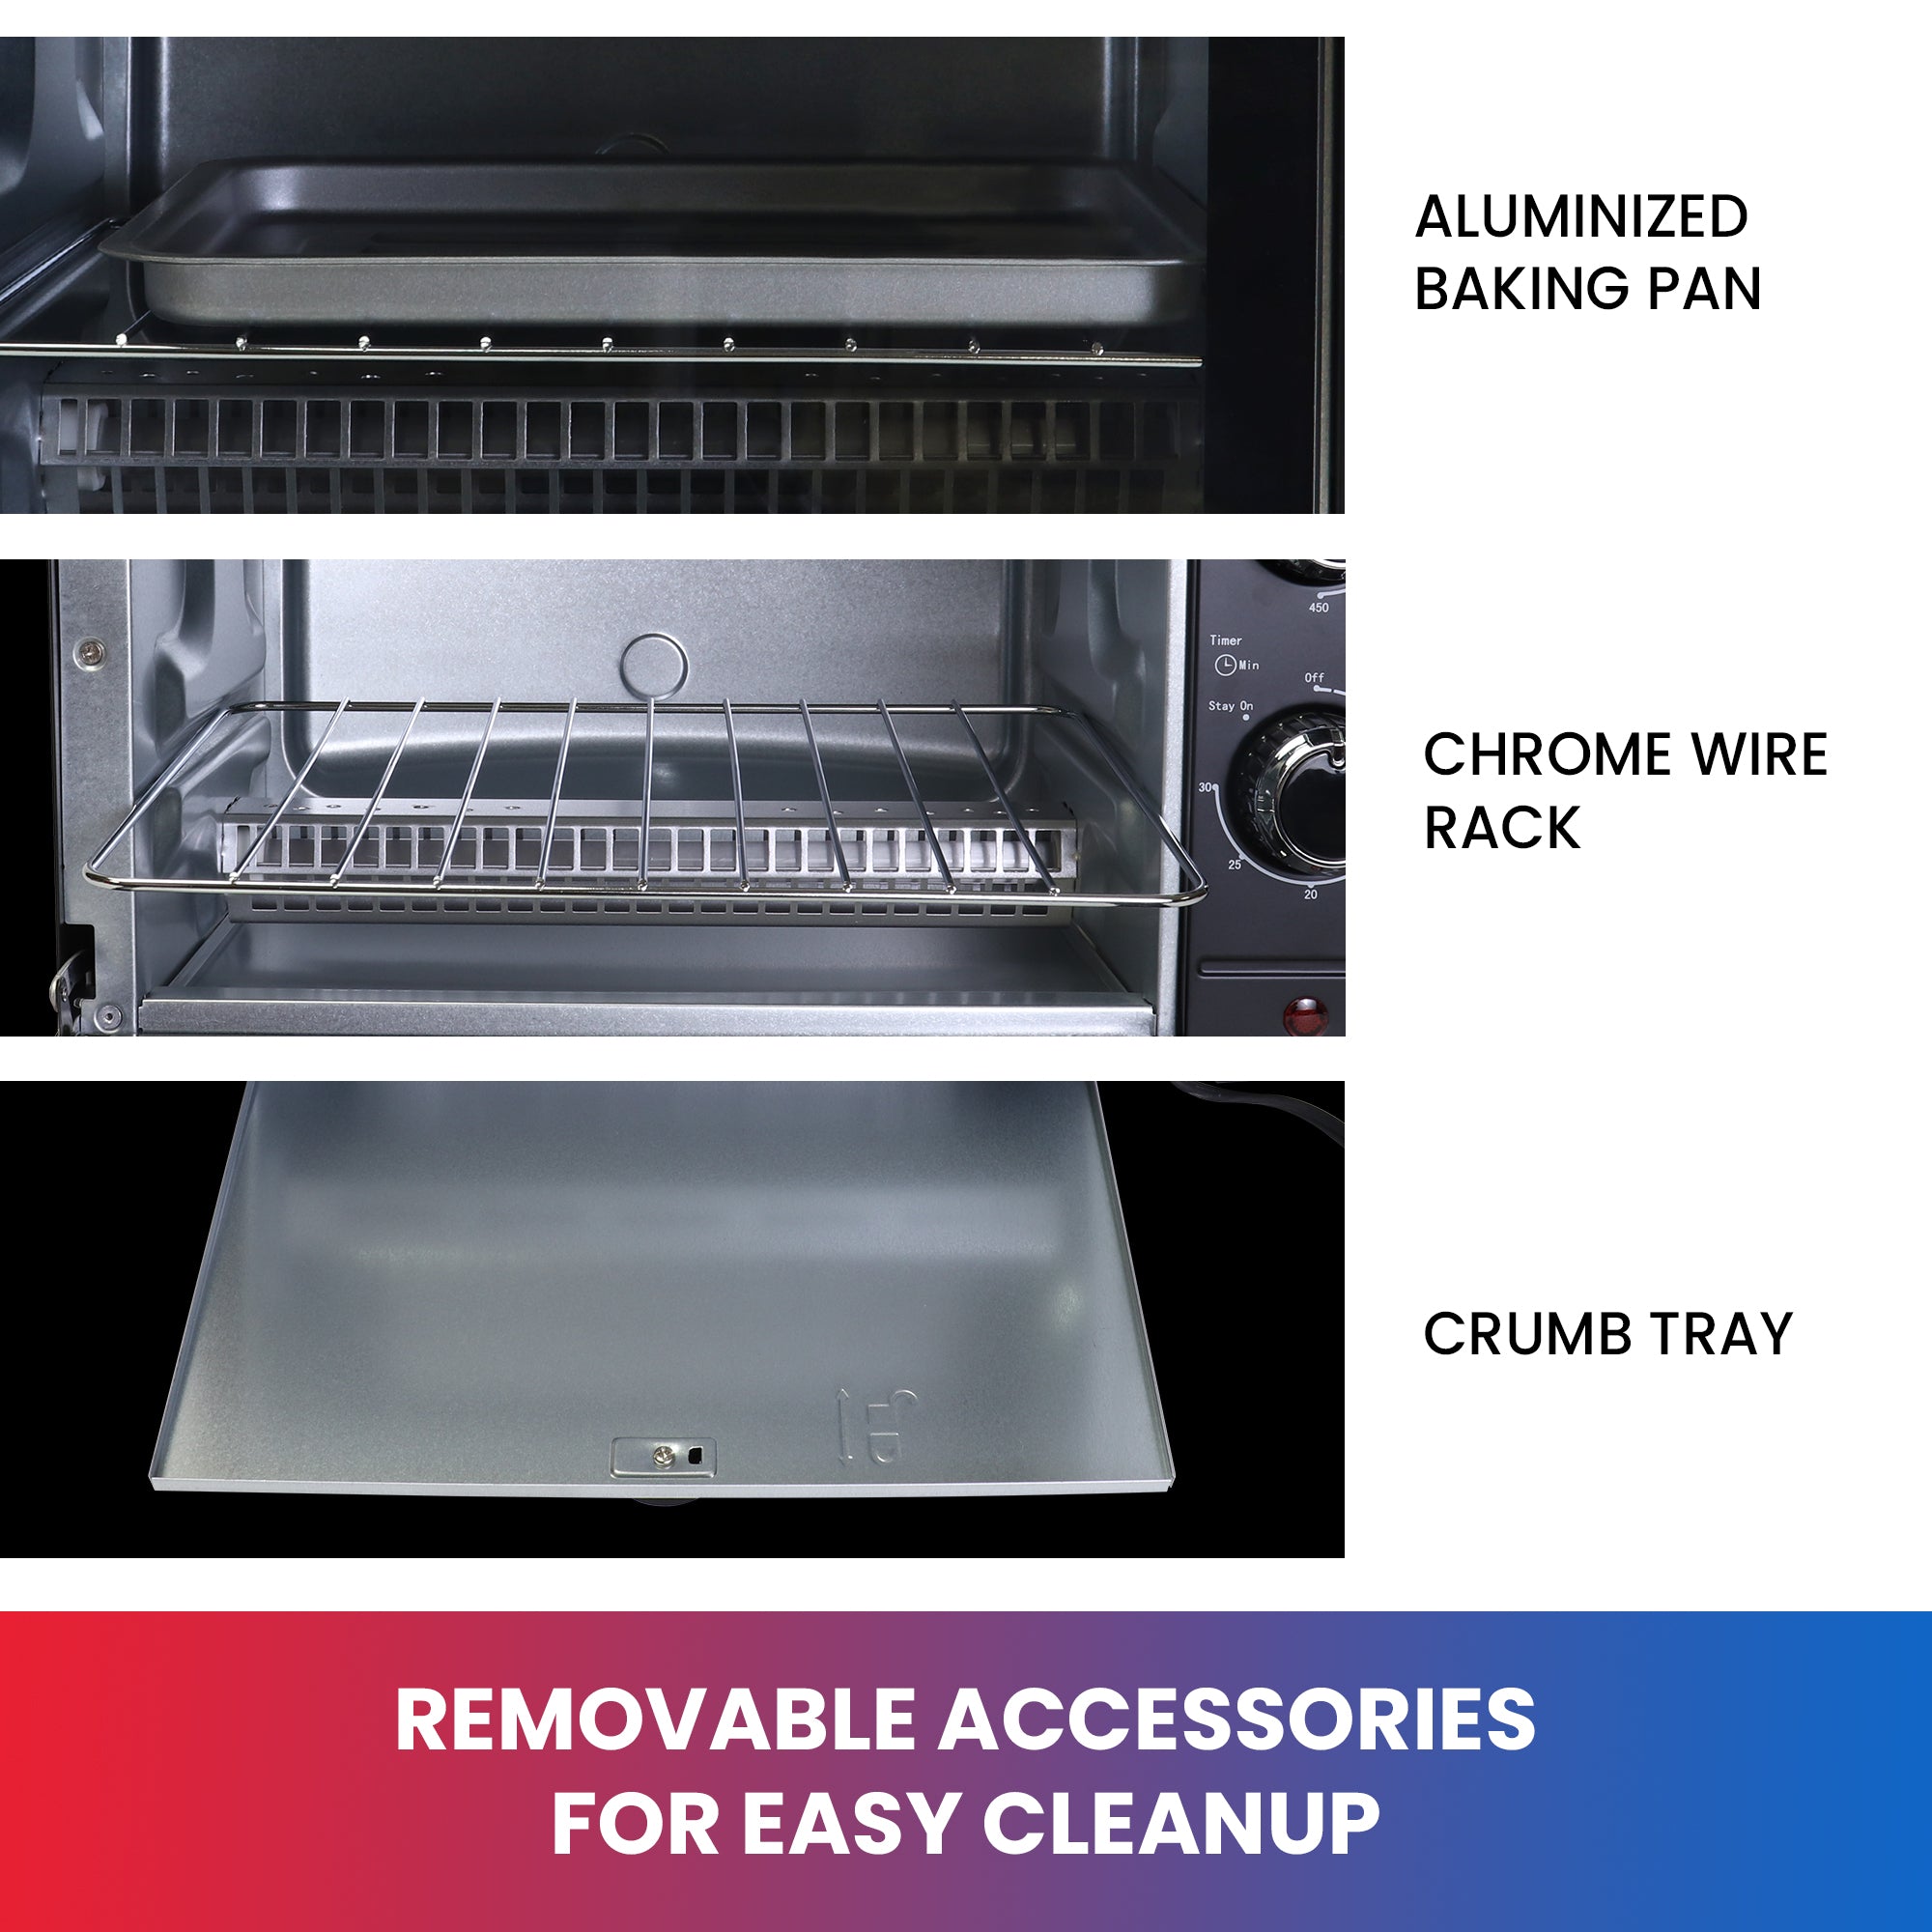 Three closeup images of included accessories, labeled: Aluminized baking pan; chrome wire rack; crumb tray. Text below reads "Removable accessories for easy cleanup"